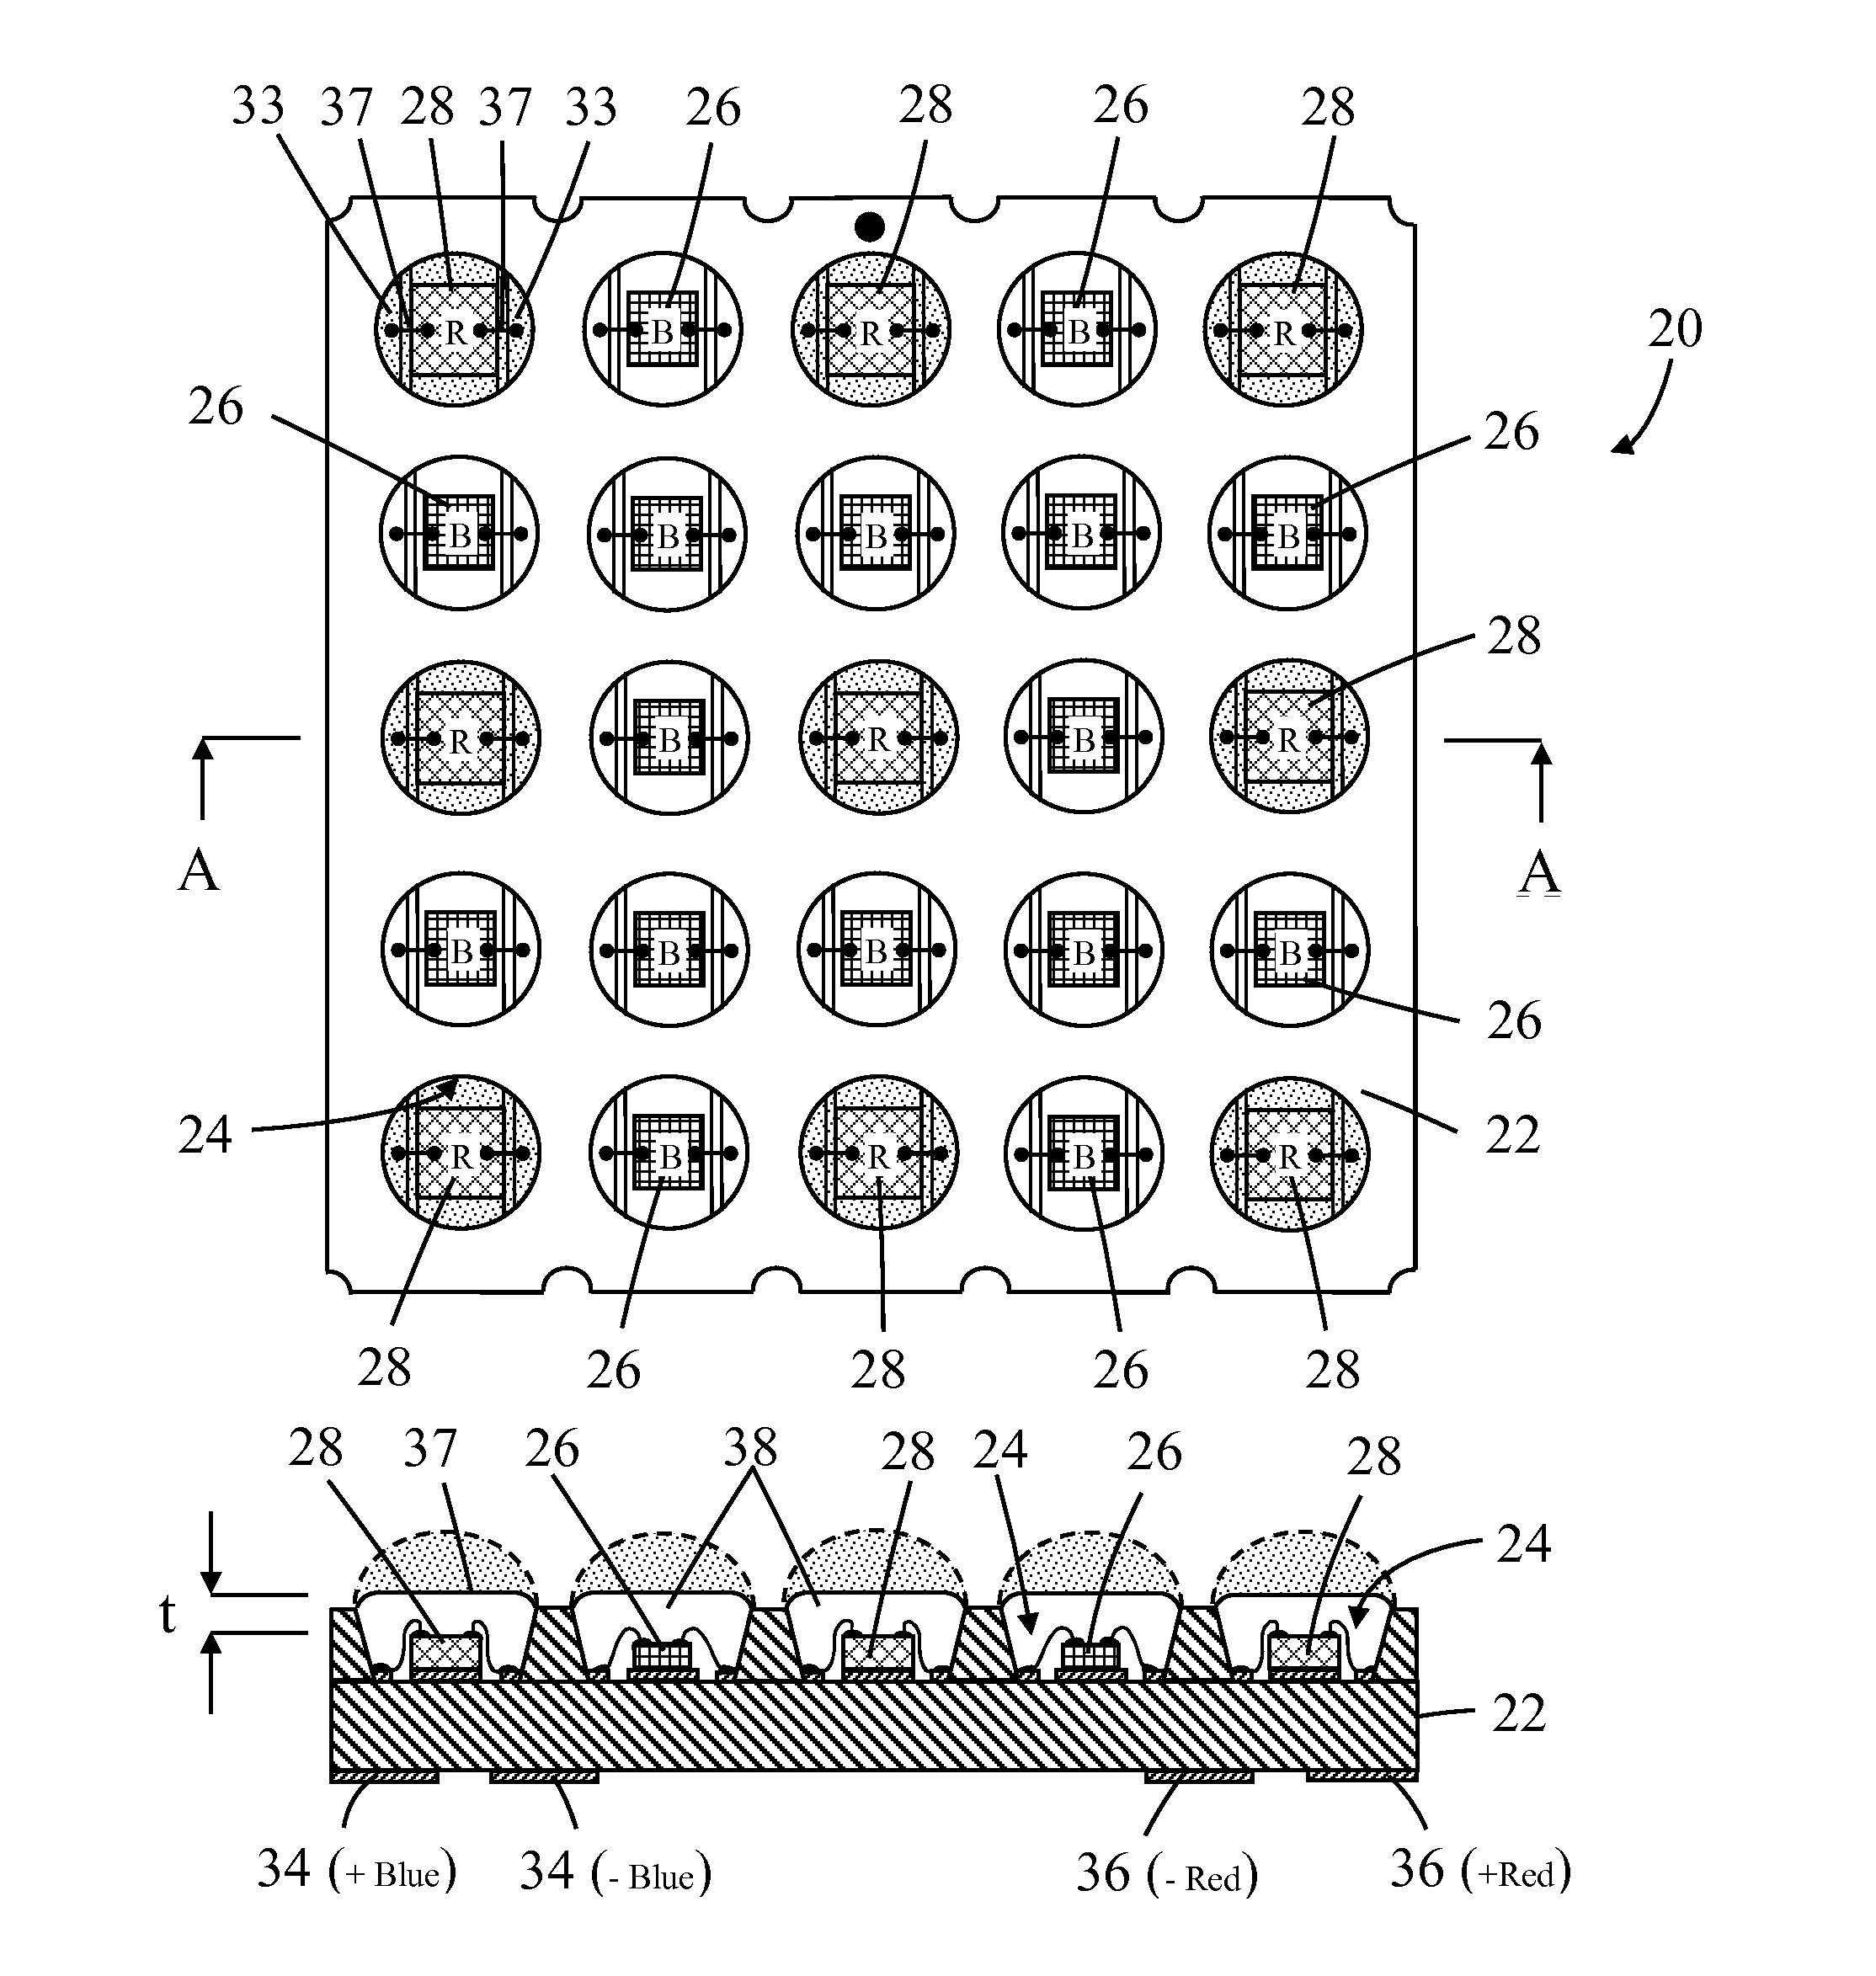 Led-based light emitting systems and devices